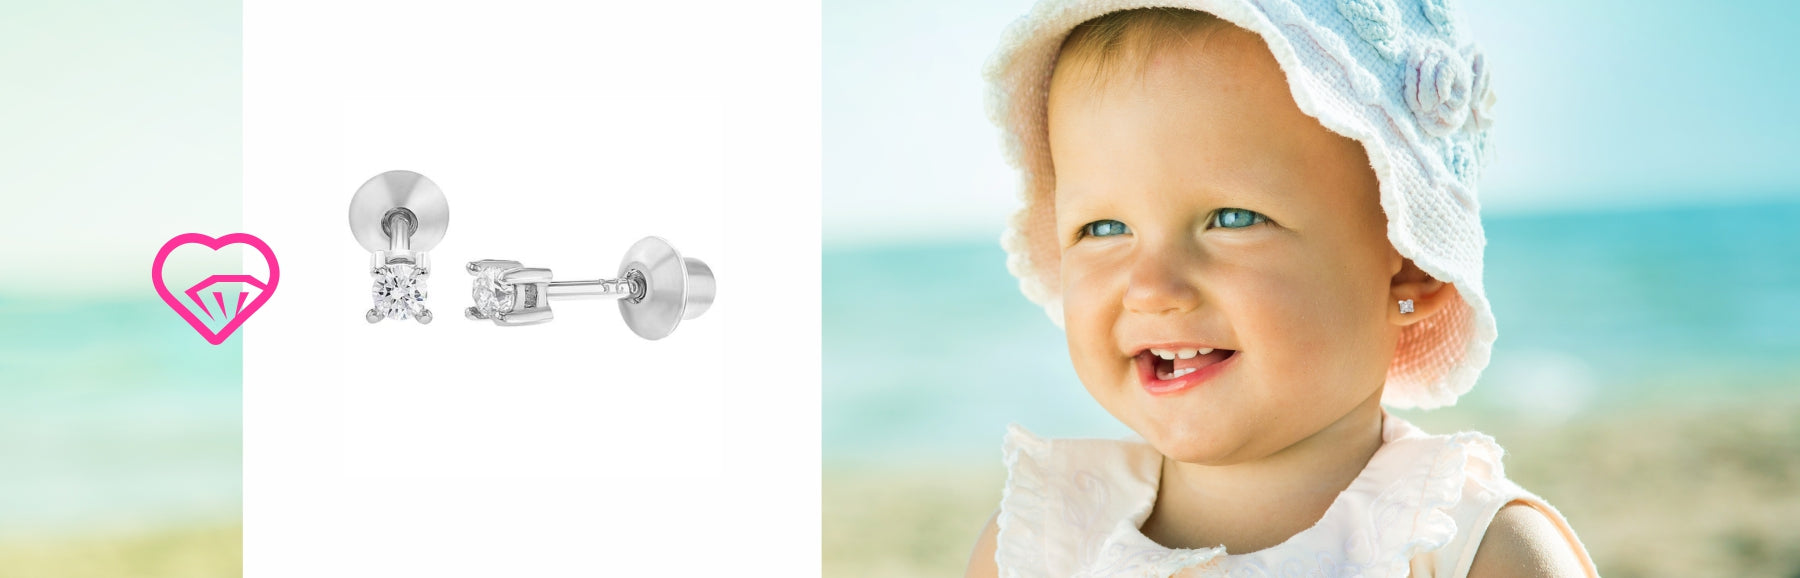 BABY’S-EARS-SENSITIVE-TO-EARRINGS-WHAT-YOU-SHOULD-KNOW